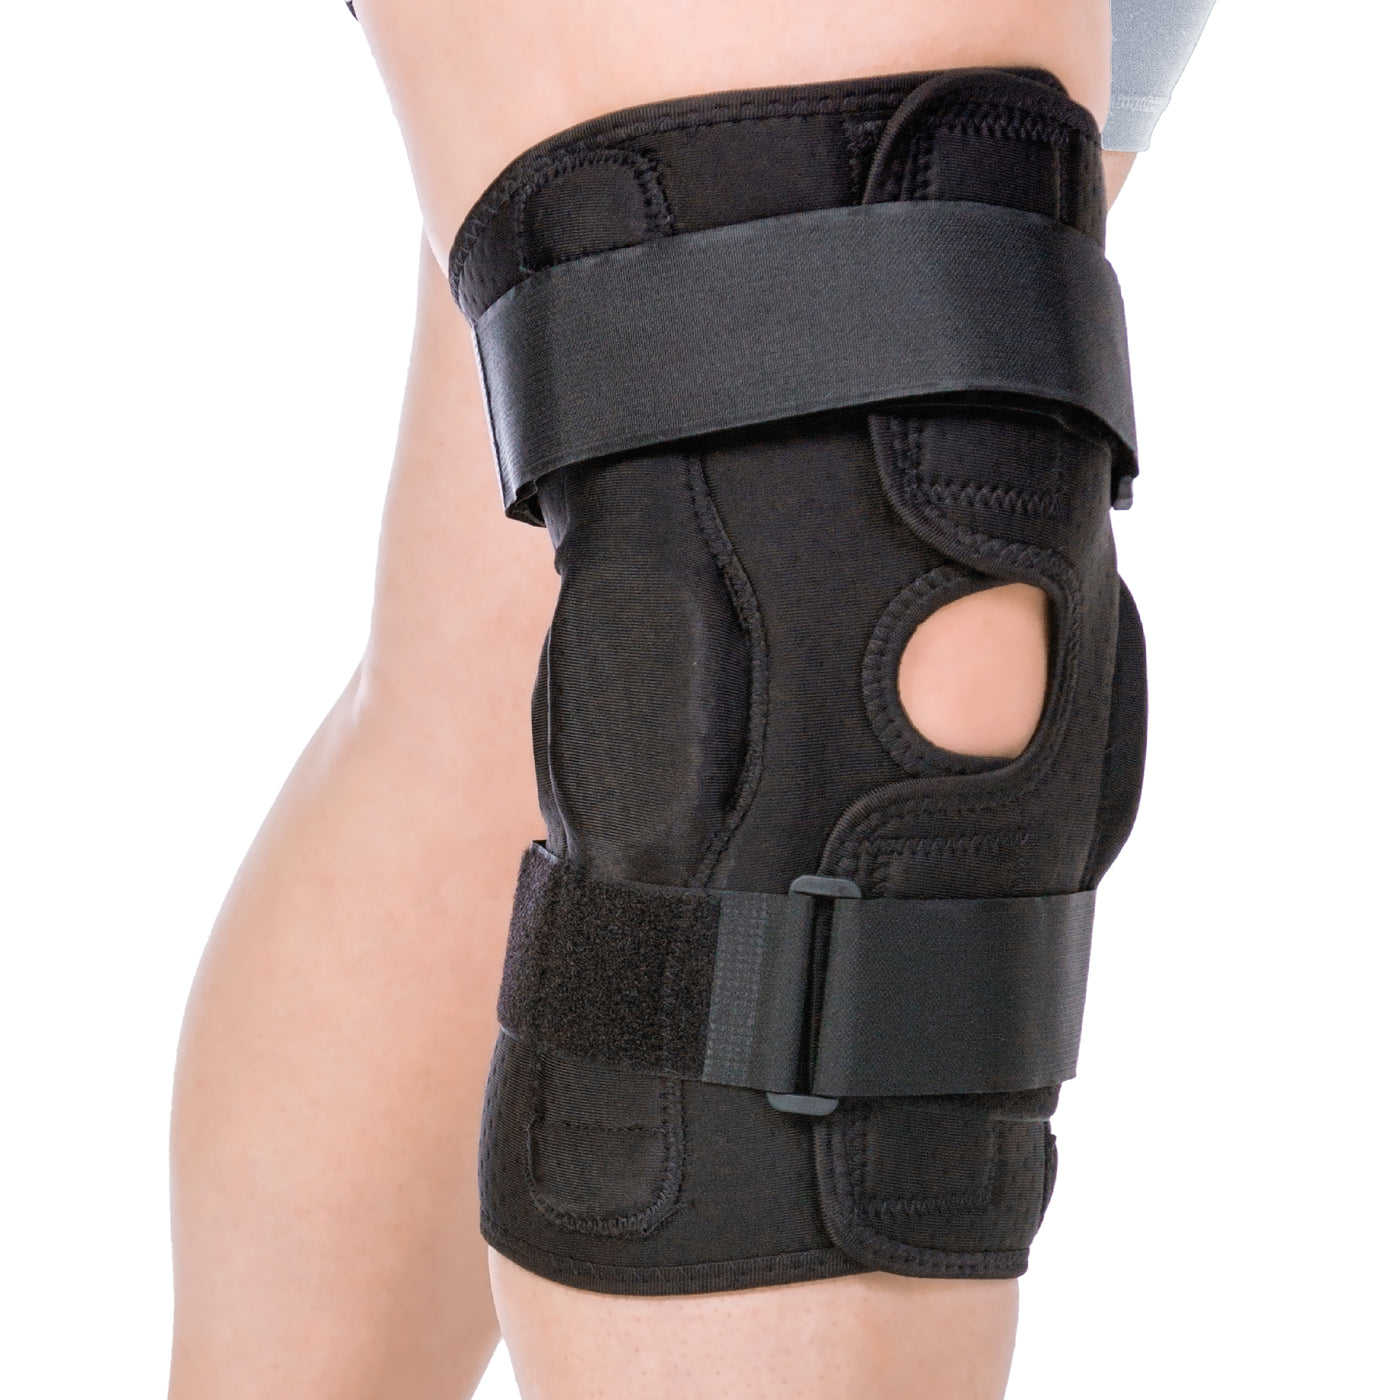 Understanding the Benefits and Types of ACL Knee Braces